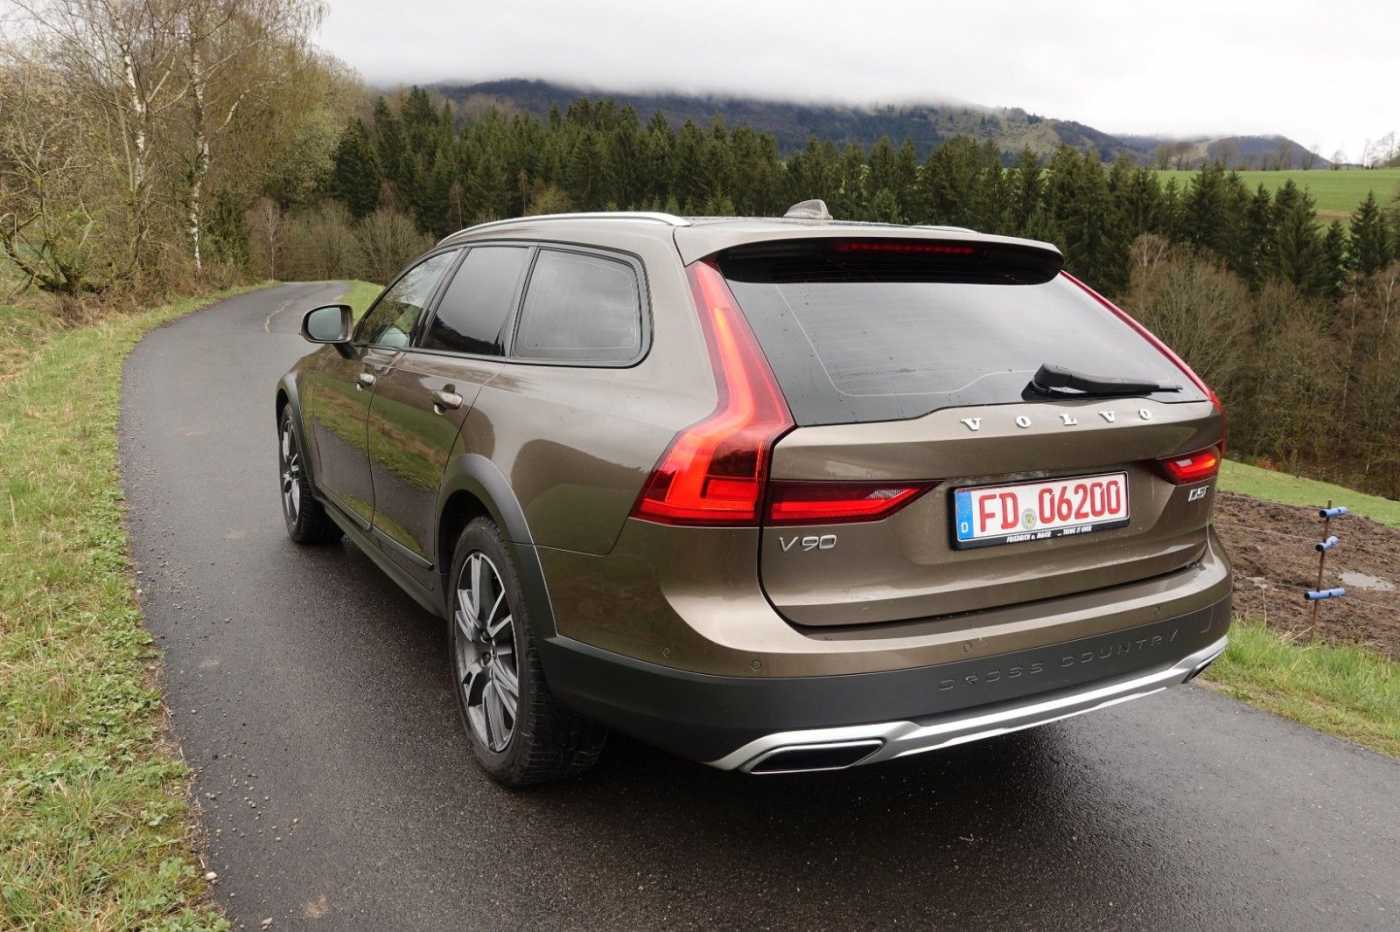 Volvo  V90 Cross Country D5 AWD (173KW/235PS) Cross Country Pro aut. (AWD)